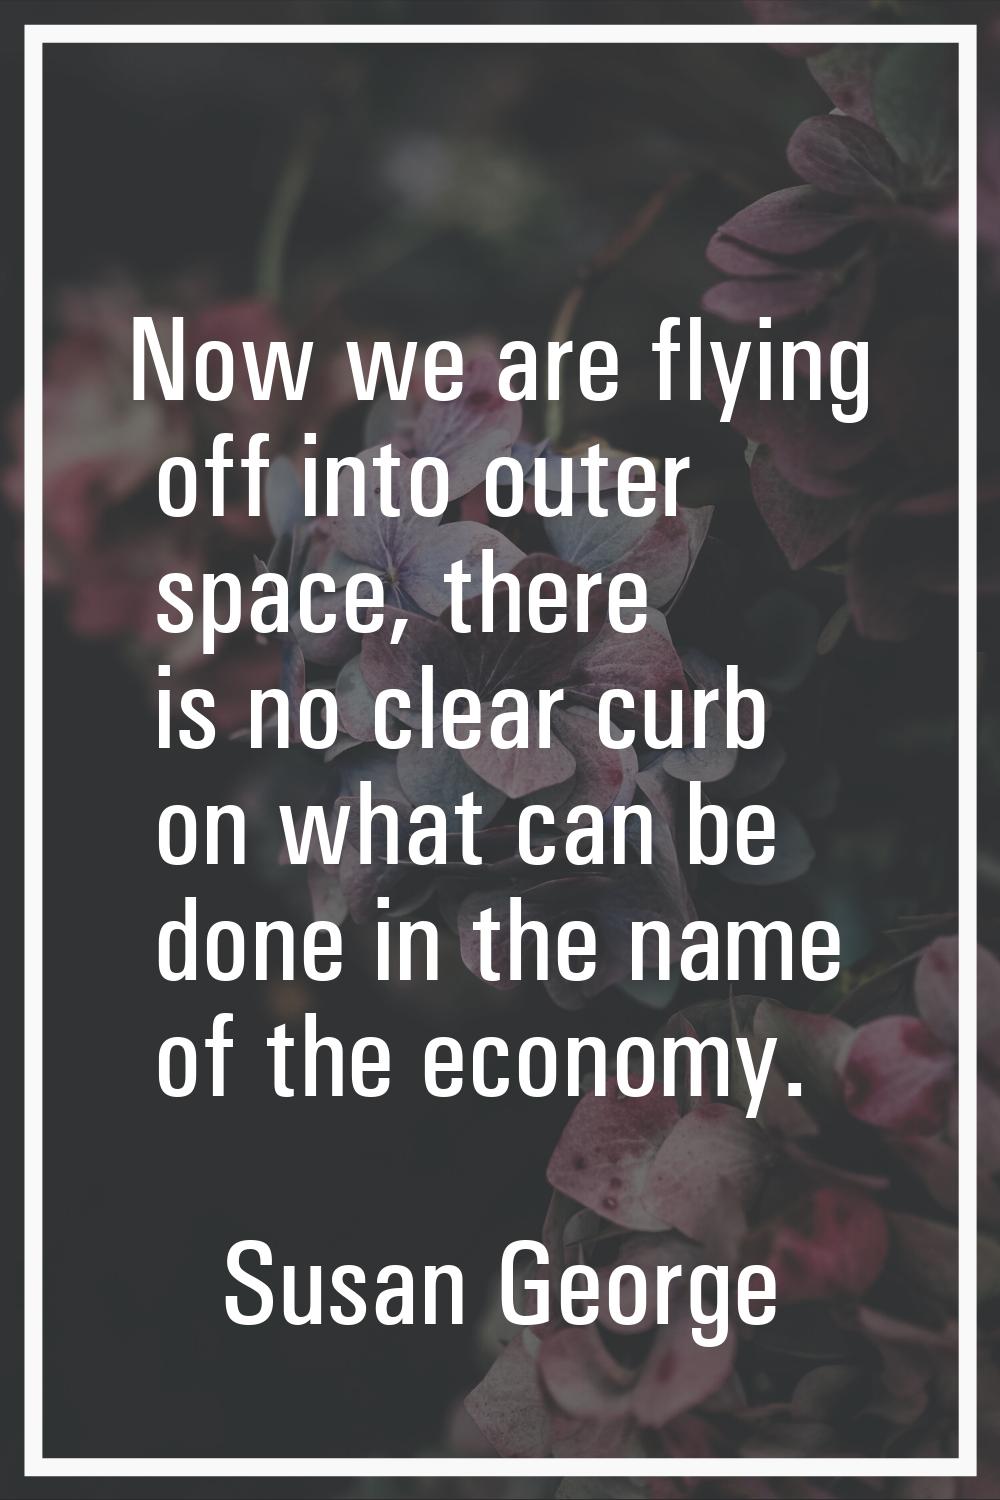 Now we are flying off into outer space, there is no clear curb on what can be done in the name of t